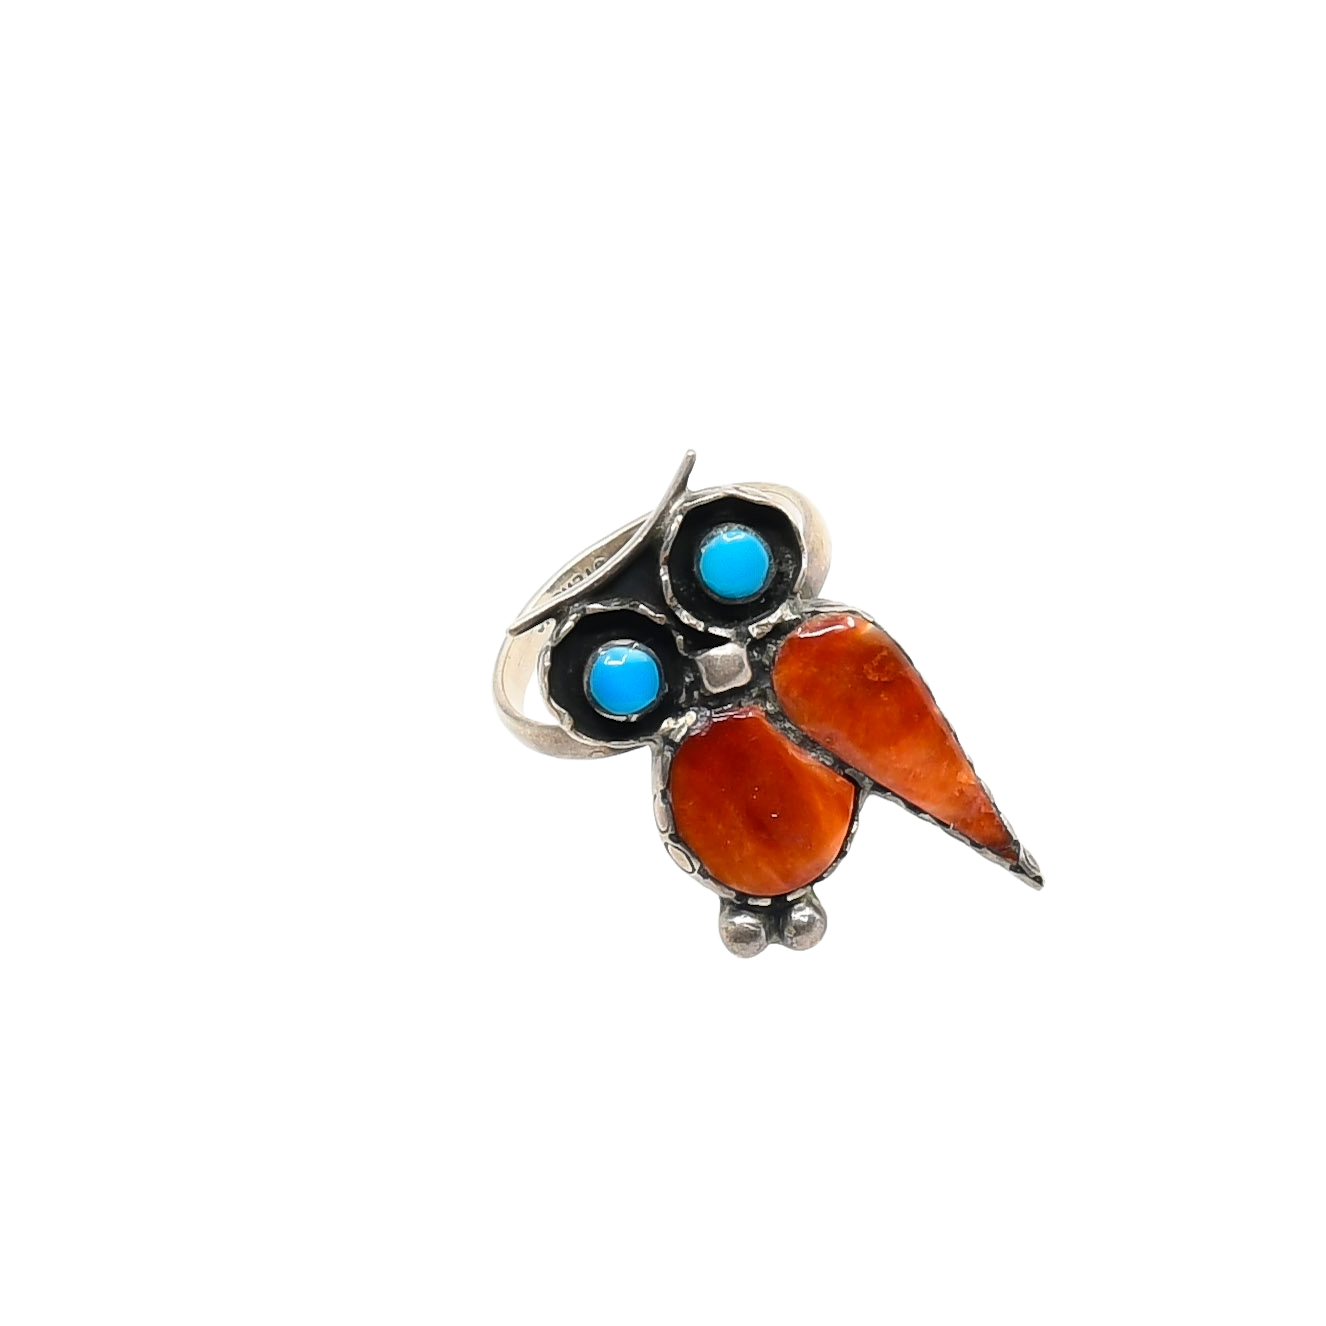 Vintage Zuni Owl Ring With Turquoise and Spiny Oyster